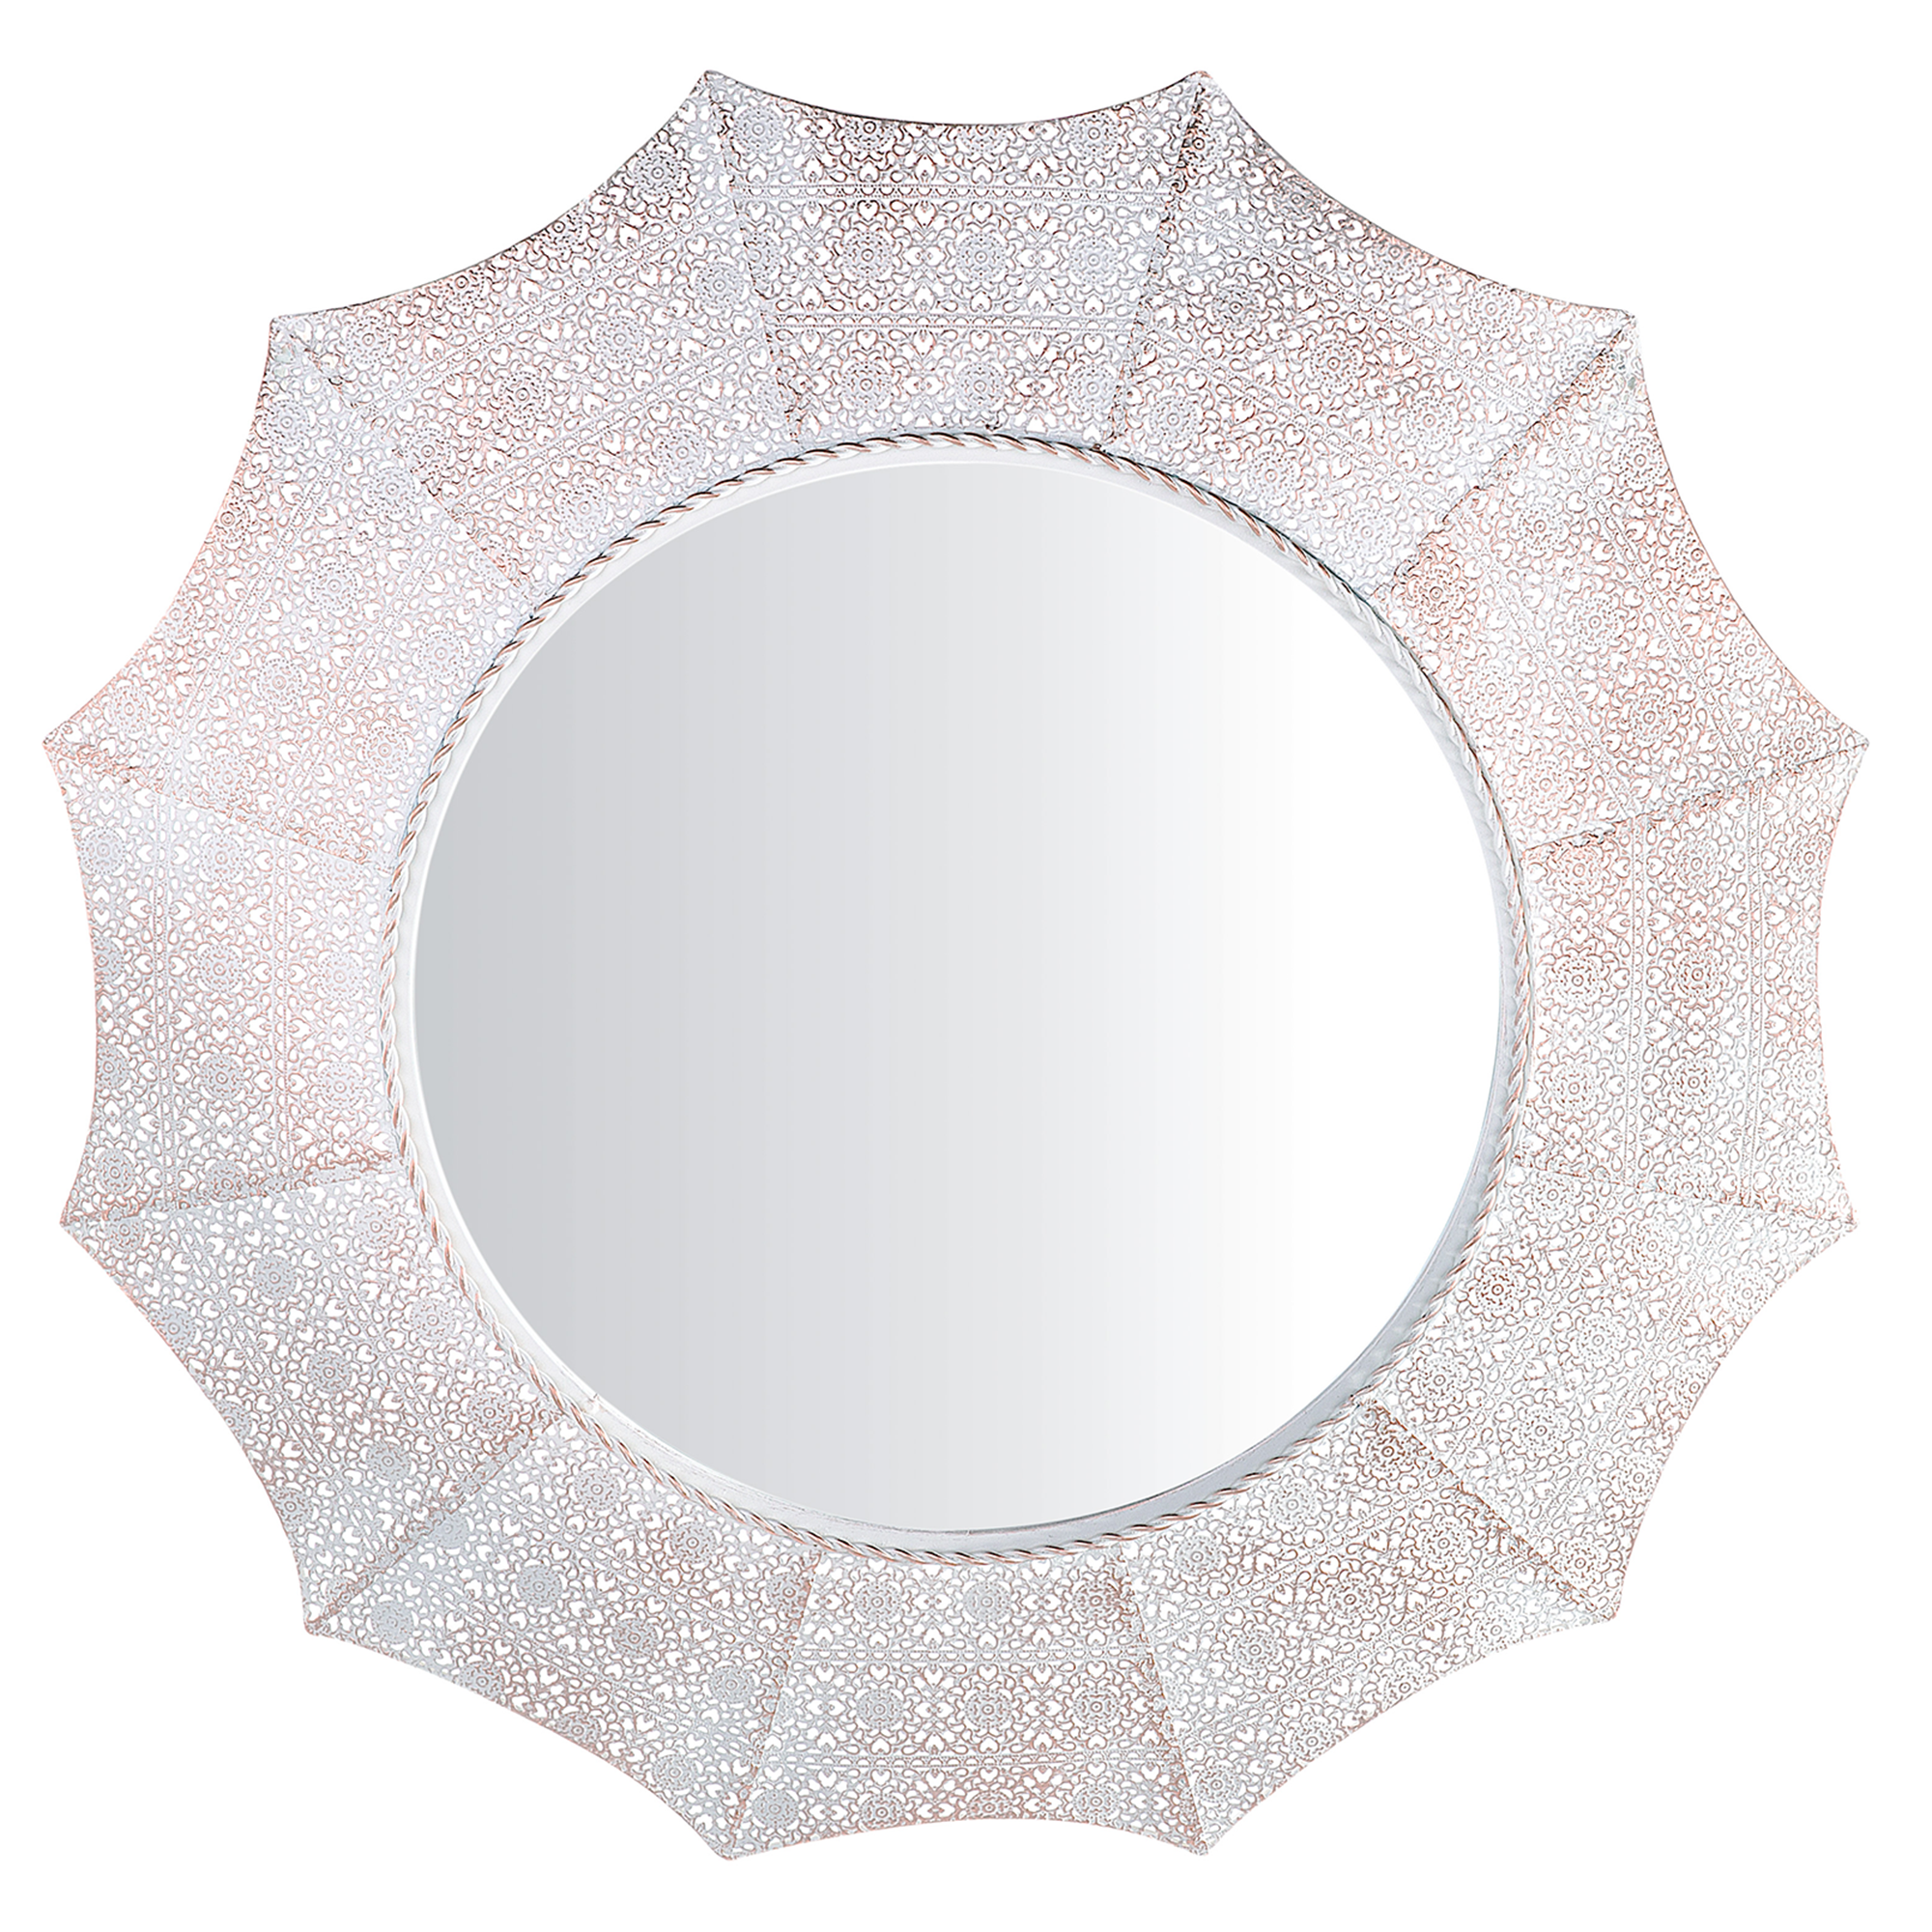 Beliani Wall-Mounted Hanging Mirror White with Copper 68 cm Round Brushed Finish Sun Shape